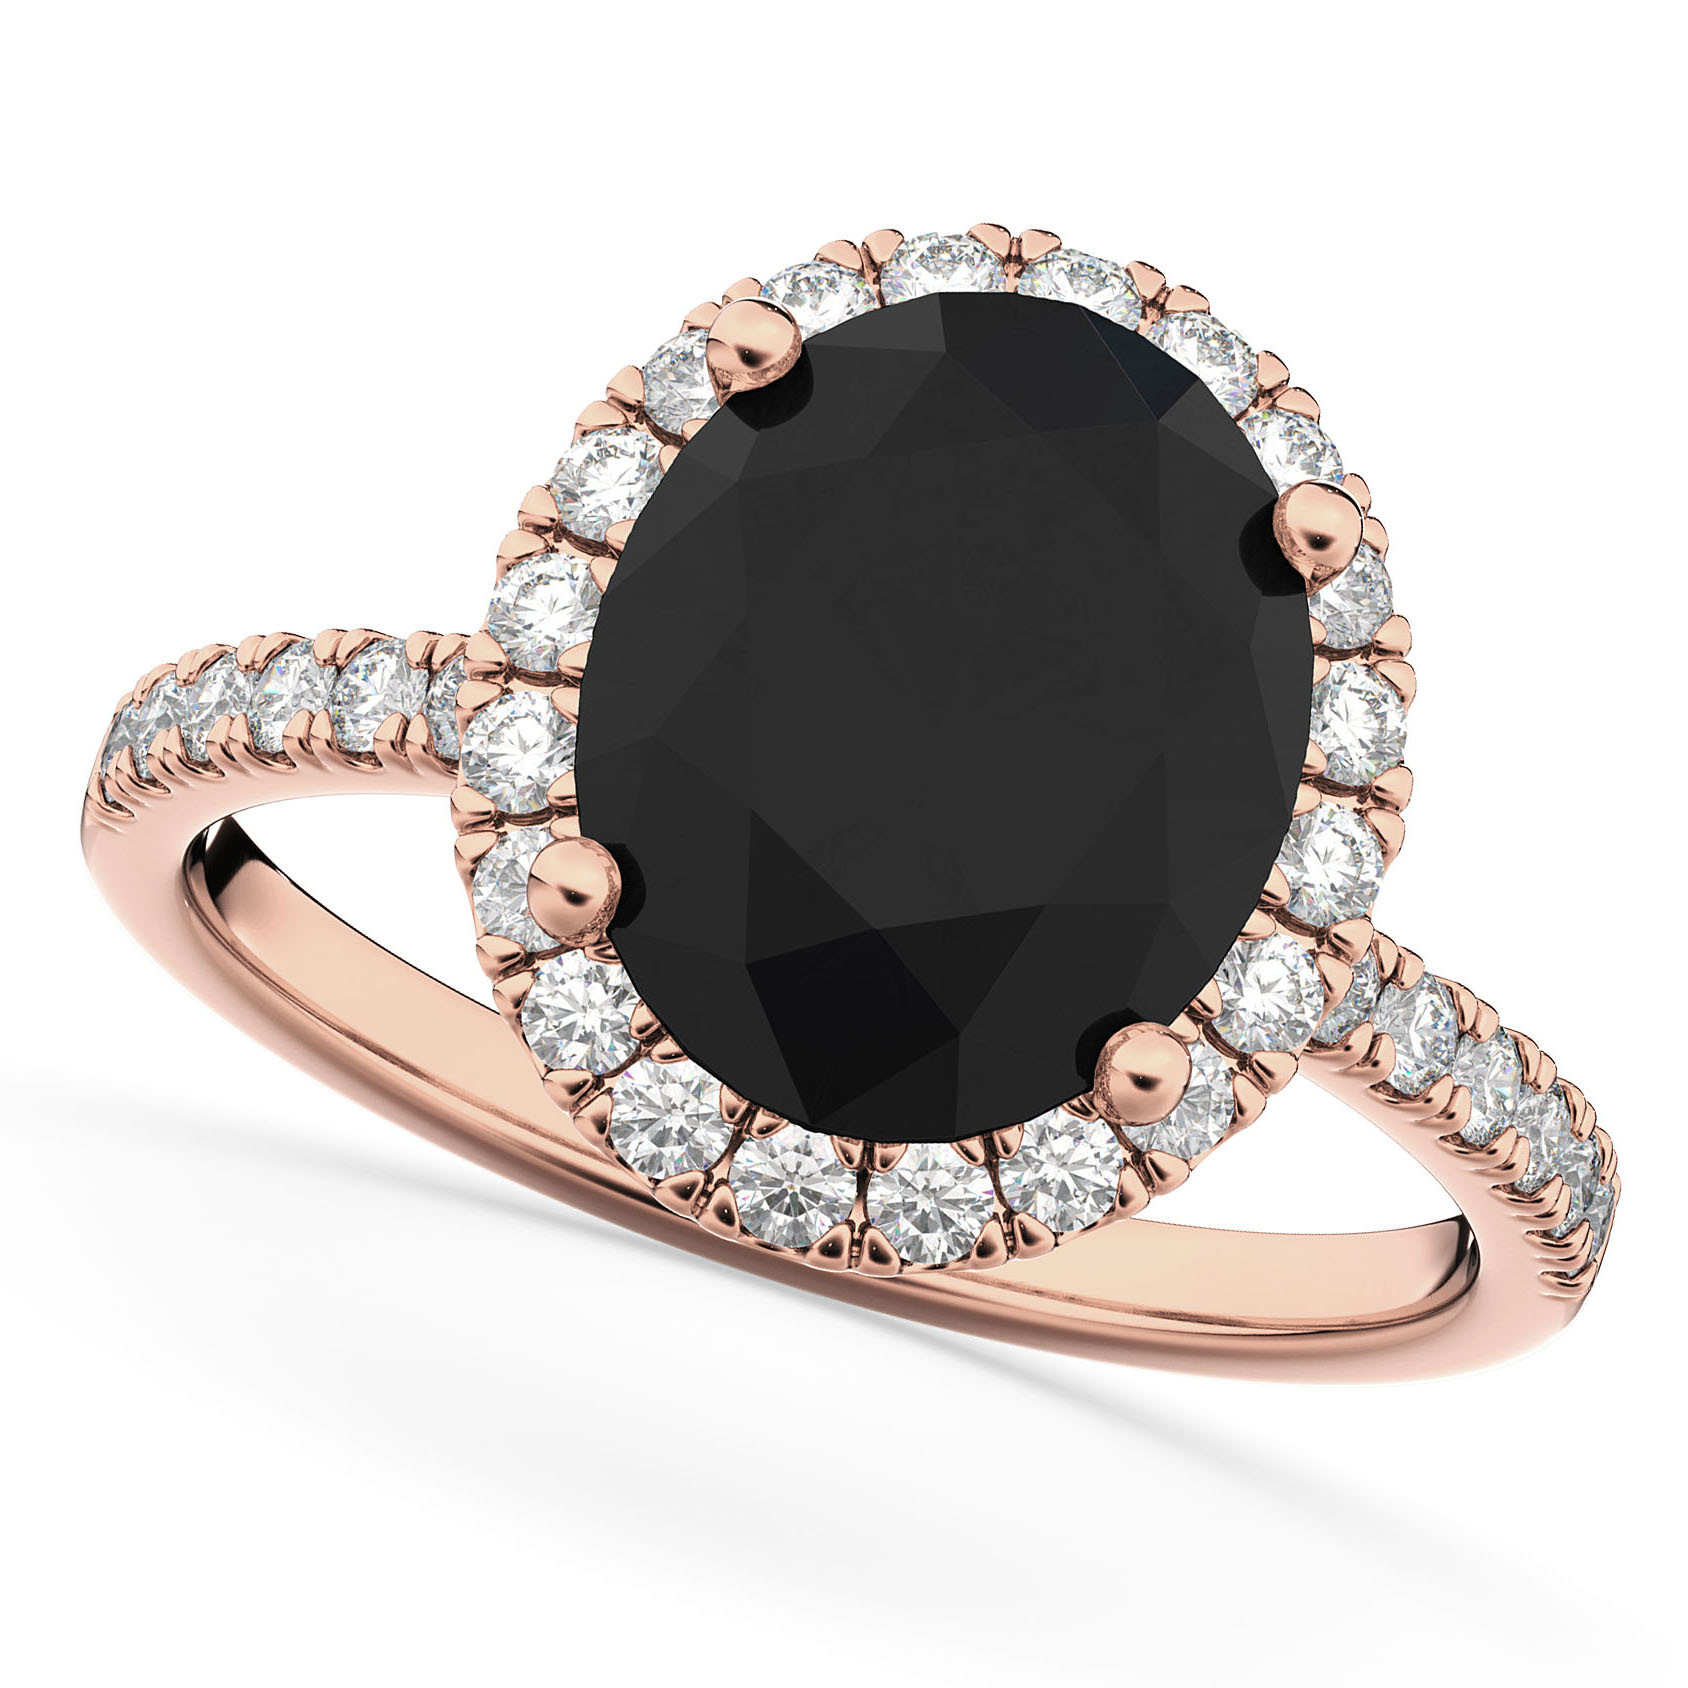 Rose Gold And Black Diamond Engagement Ring
 Oval Black Diamond & Diamond Engagement Ring 14K Rose Gold